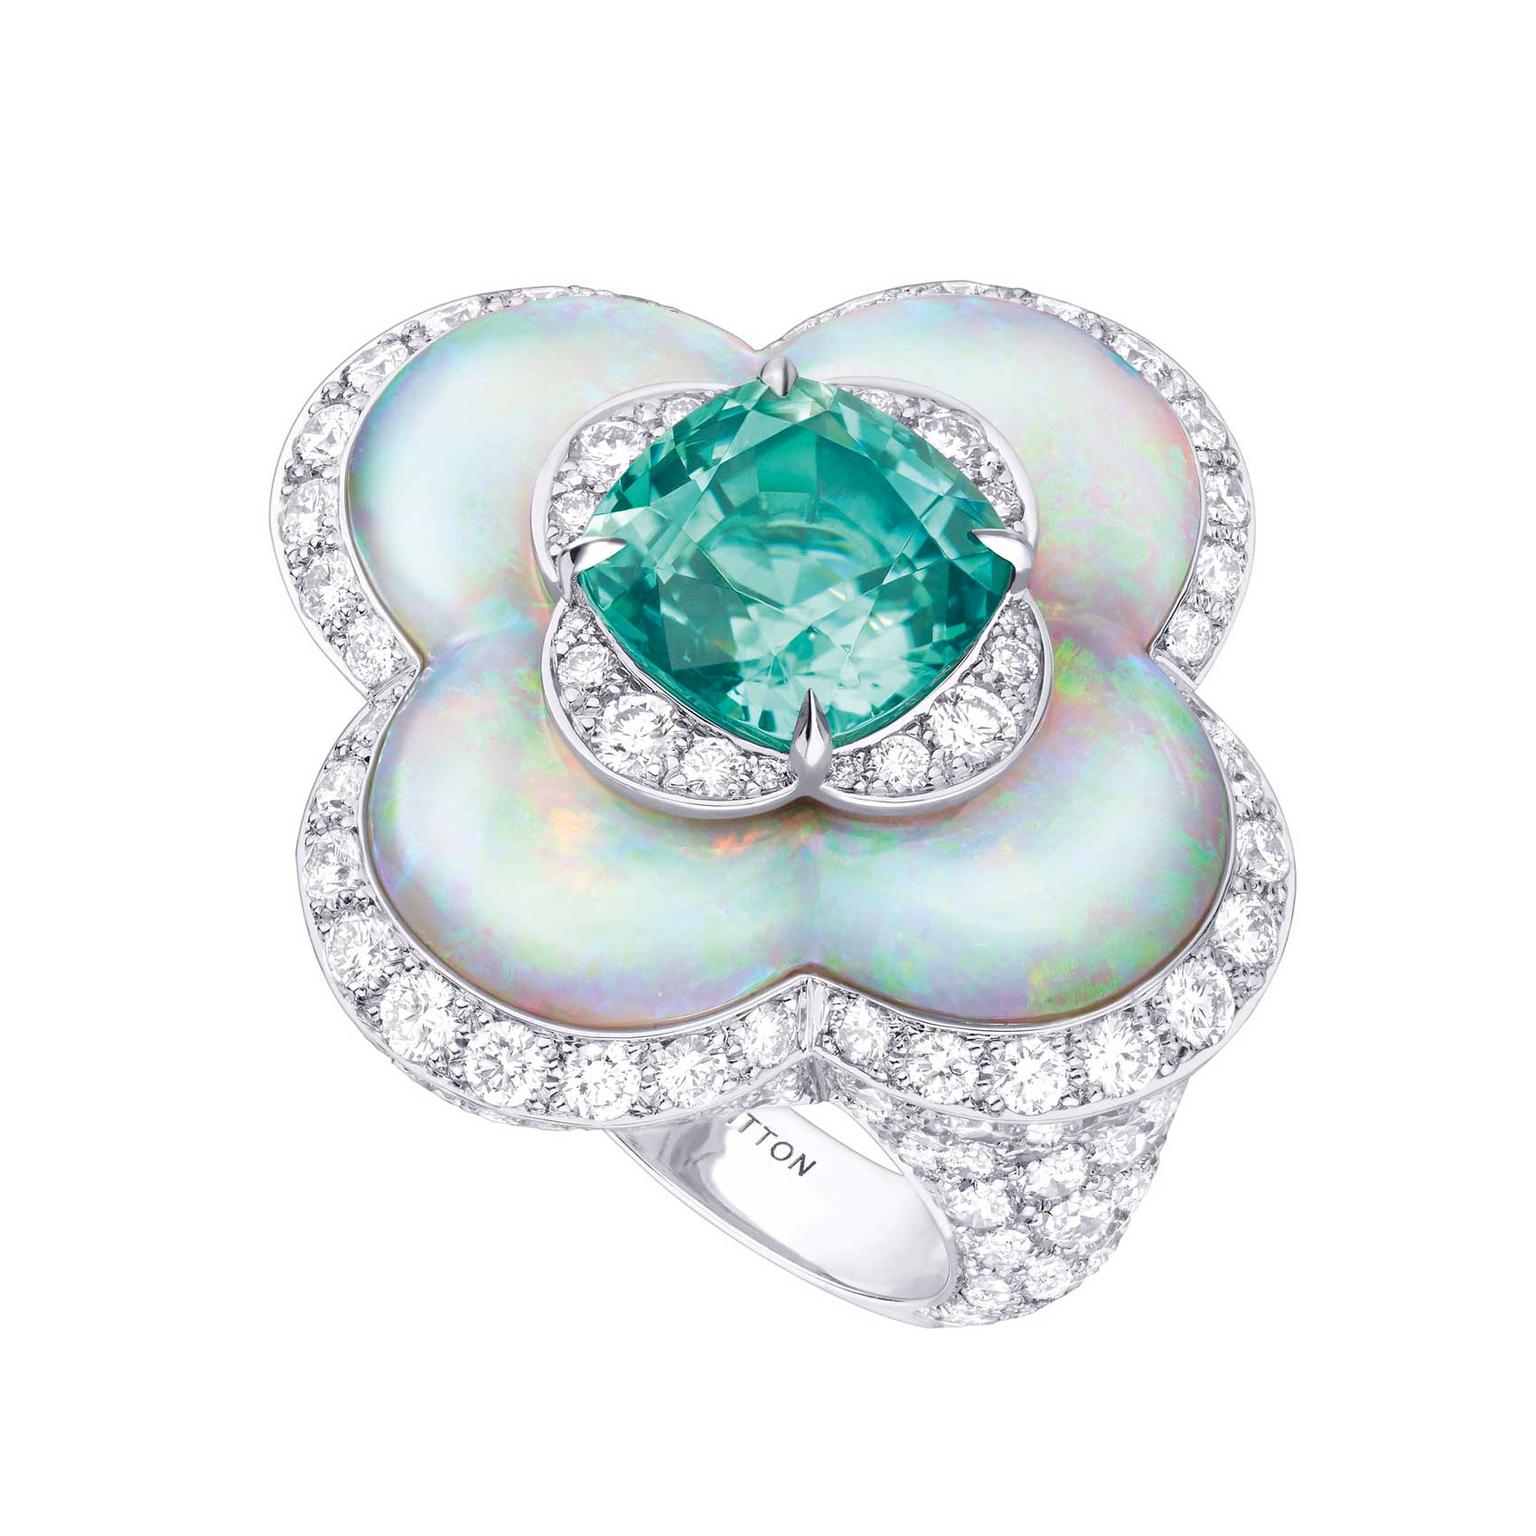 Louis Vuitton Blossom tourmaline and opal ring